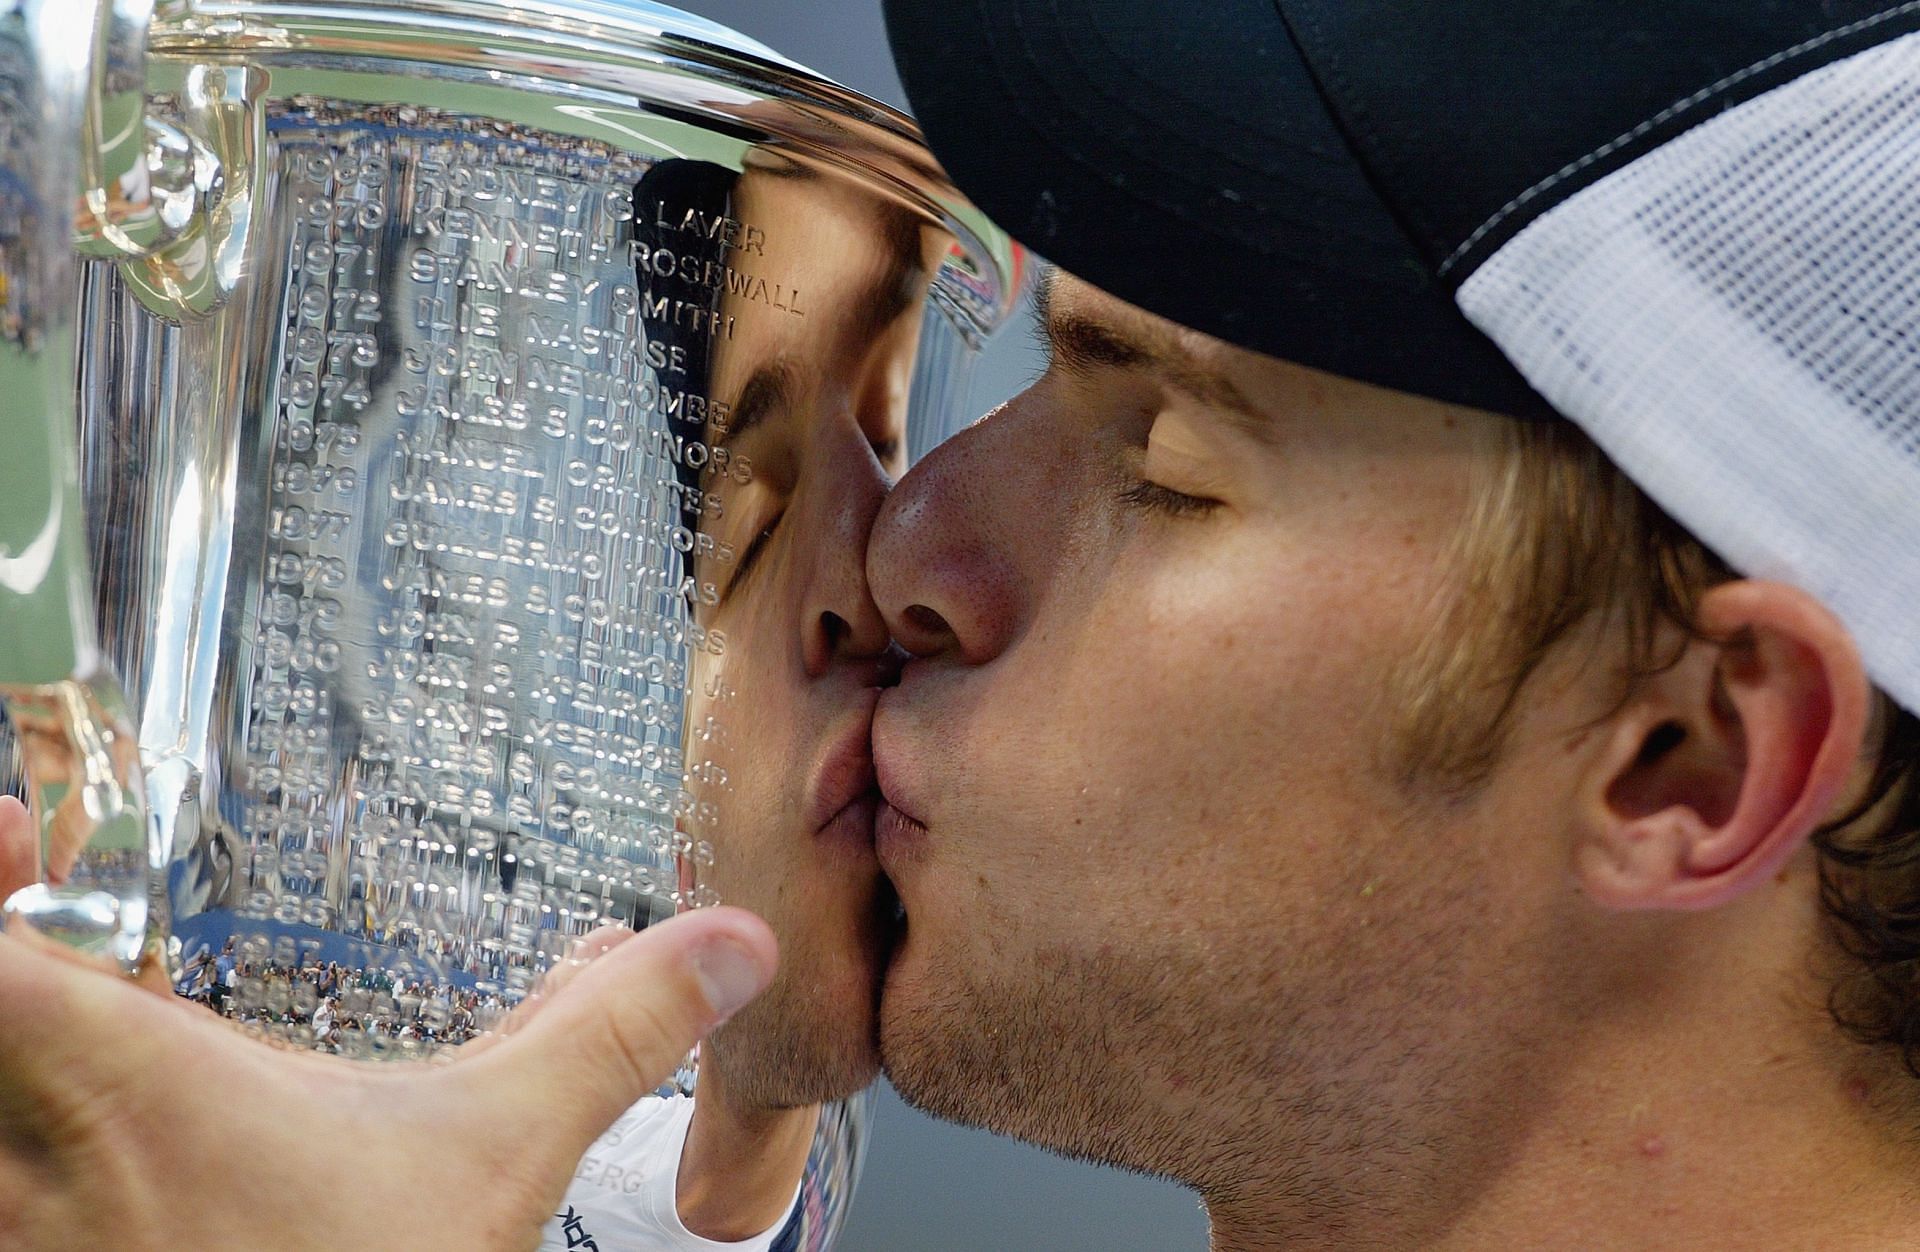 Andy Roddick kisses the US Open 2003 trophy